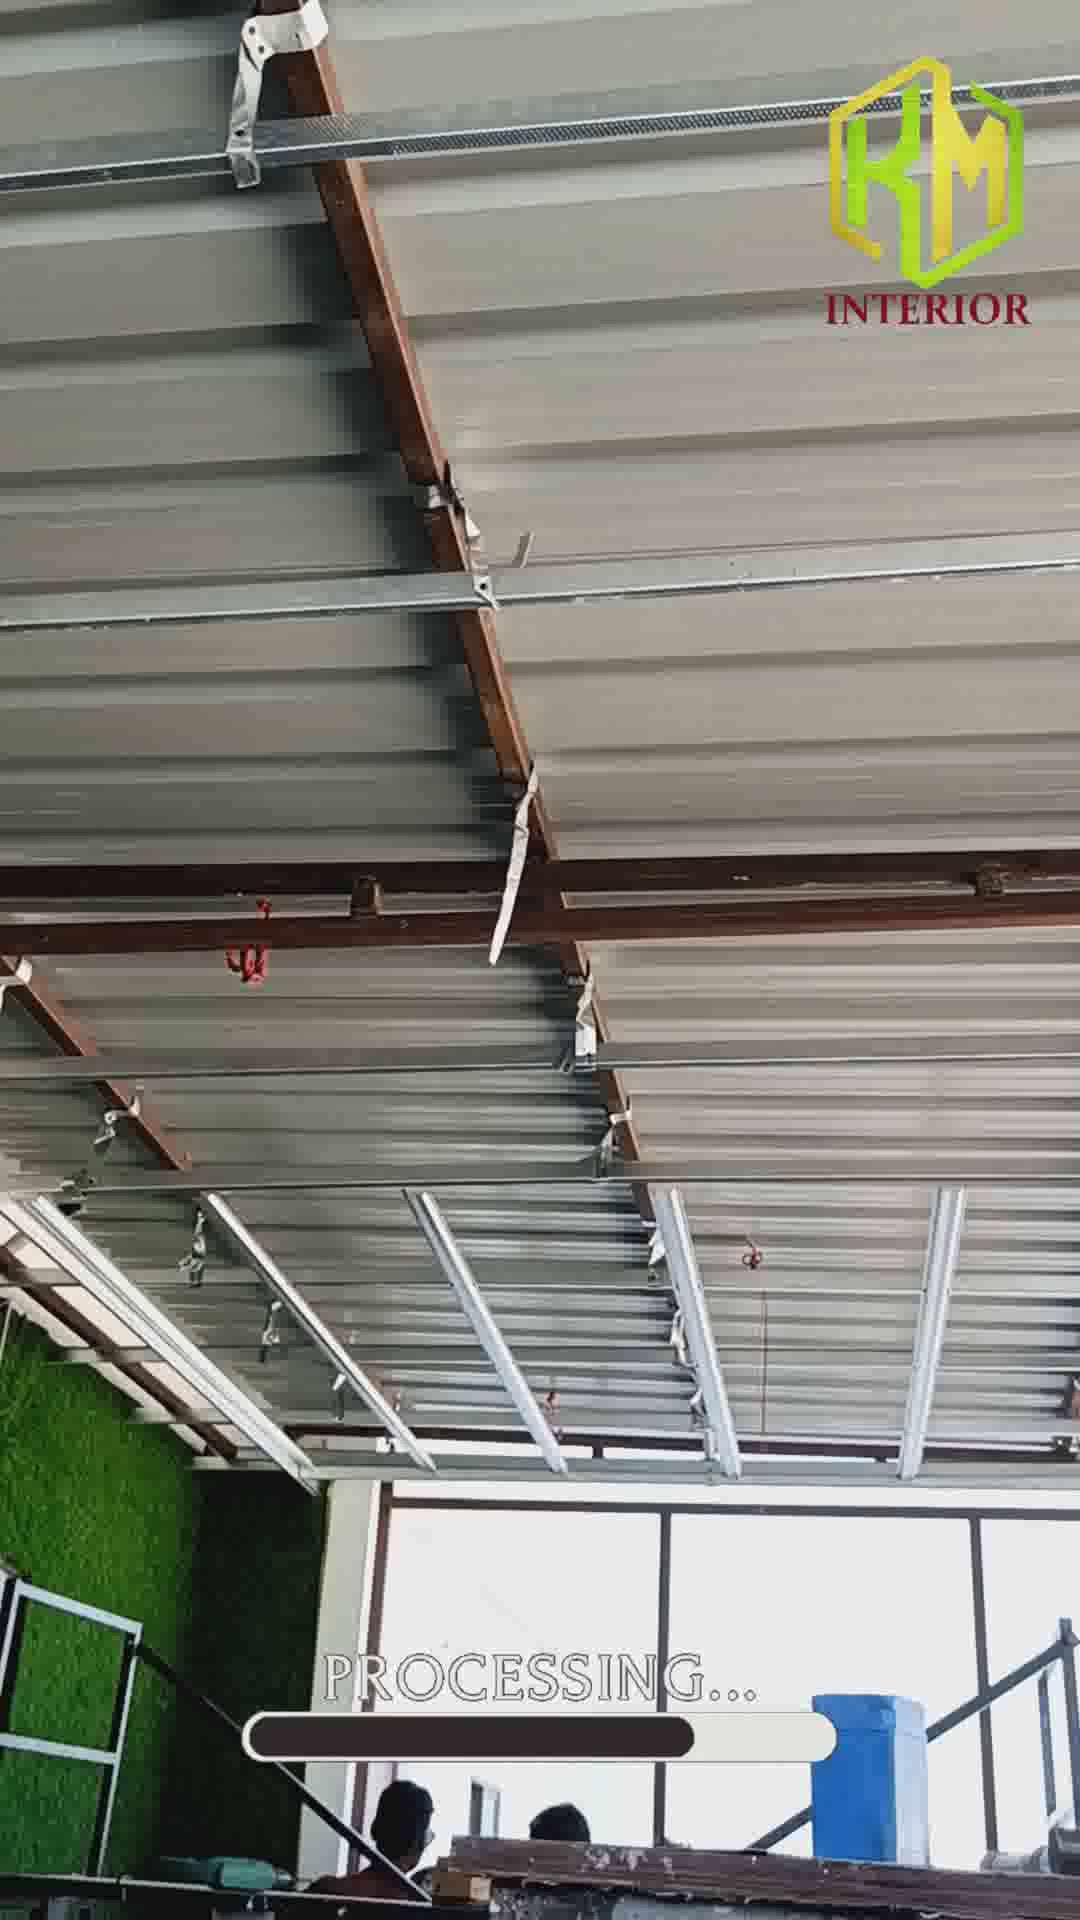 PVC Ceiling 100% Waterproof And Fire Resistance
KM INTERIOR BHOPAL M.P. 43
Contact : 8458899288 , 9685481987 #PVCFalseCeiling  #Pvc  #Pvcpanel  #pvcpanelinstallation  #pvcceilingdesign  #pvcwall  #pvcwallpanels